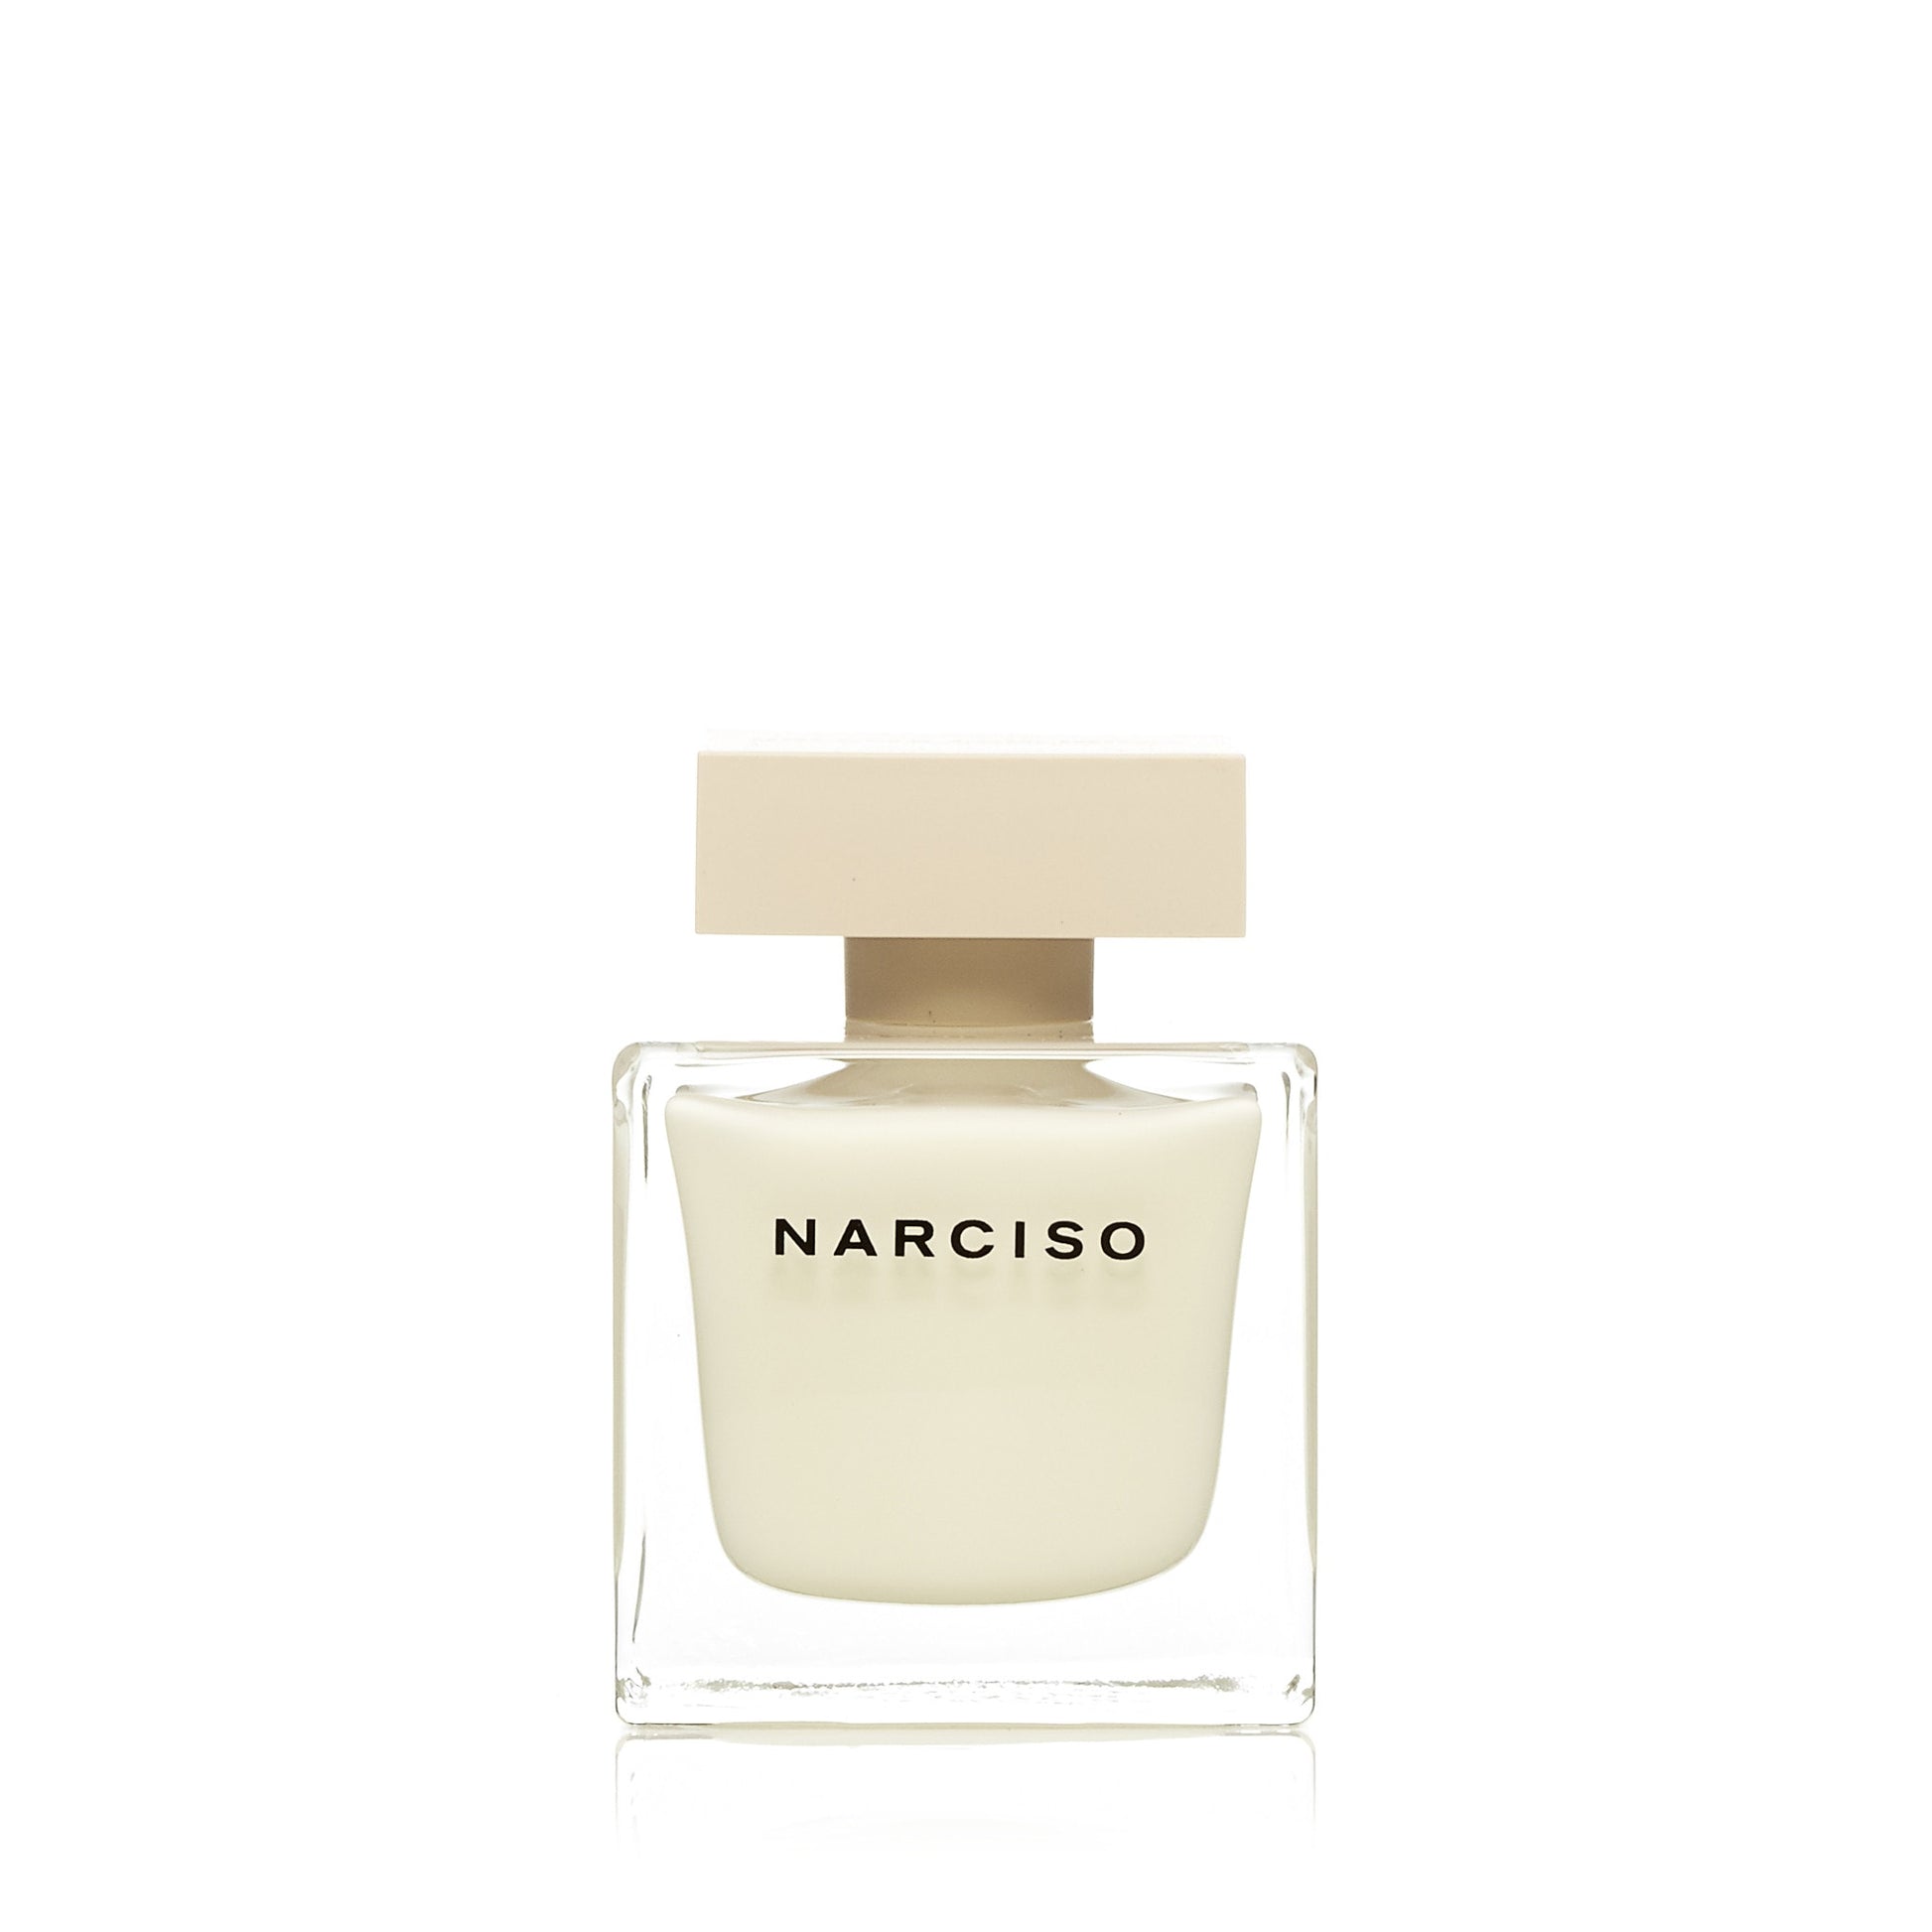 Narciso Eau de Parfum Spray for Women by Narciso Rodriguez, Product image 1